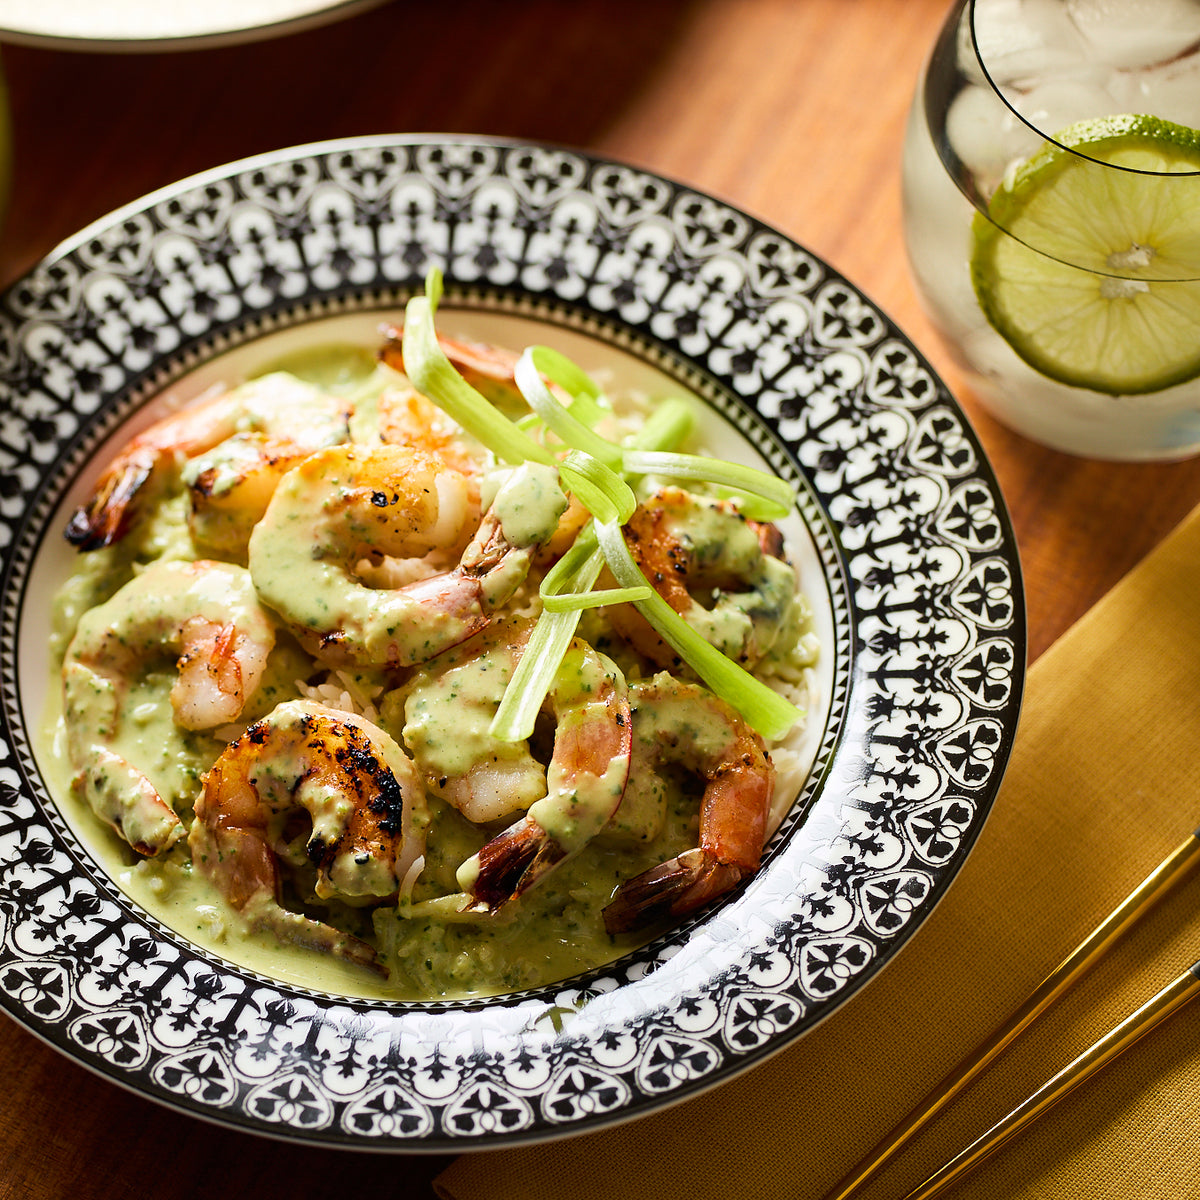 A plate of shrimp in a creamy green sauce garnished with sliced green onions, served on beautiful Casablanca Rimmed Soup Bowl by Caskata Artisanal Home with hand decorated details, accompanied by a drink garnished with a lime slice next to it.